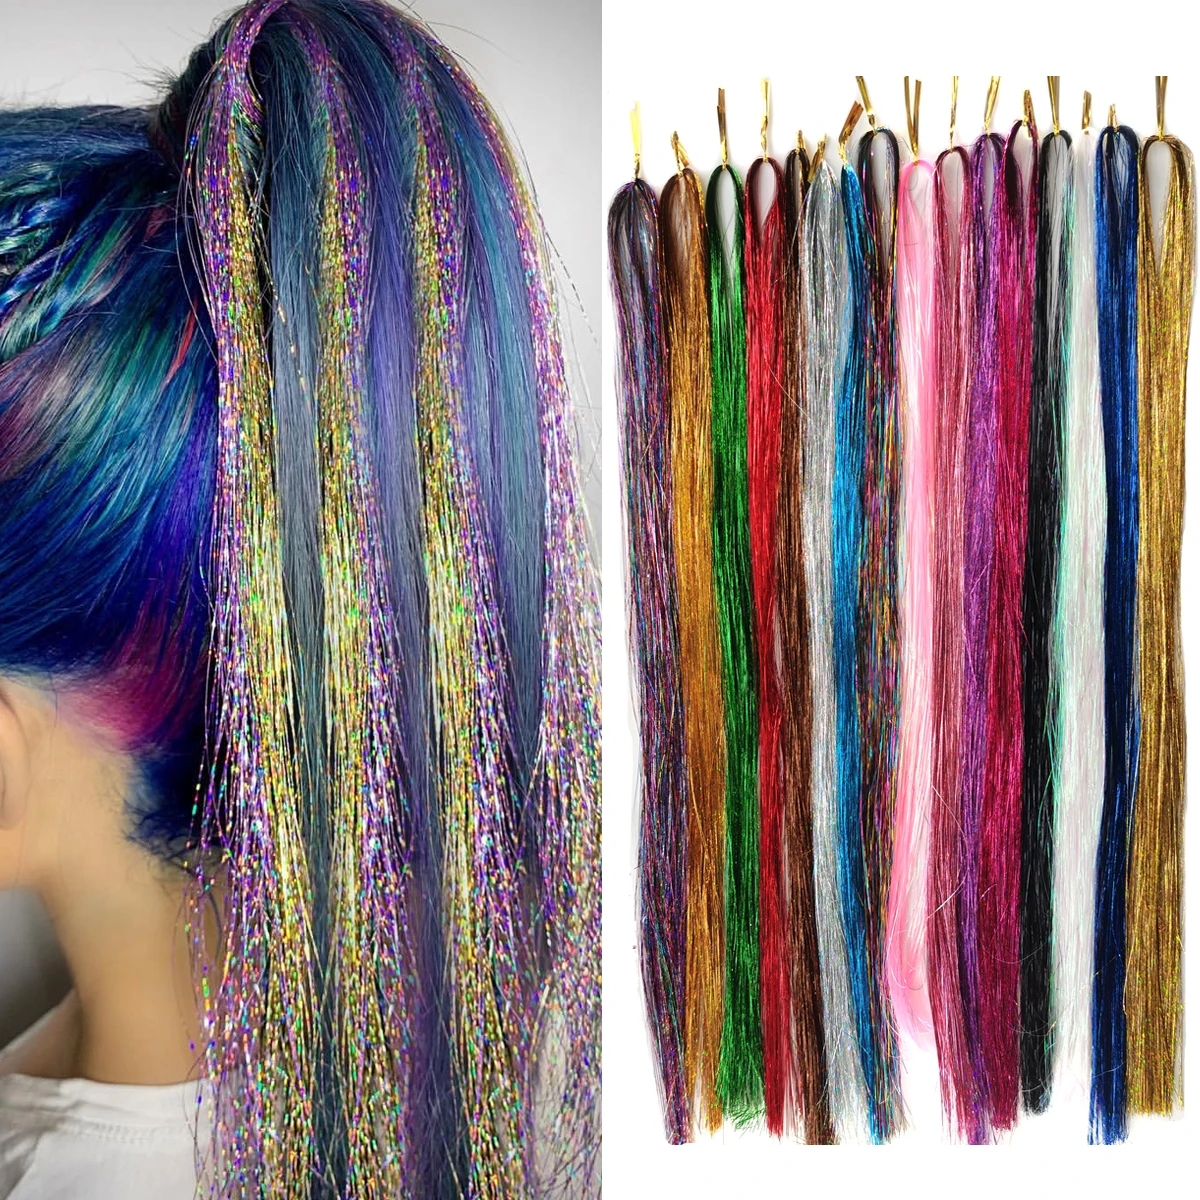 

16PCS 3200Strands Sparkle Hair Tinsel Kit With Tools Rainbow Bling Secoration Girls Synthetic Extension Glitter Party